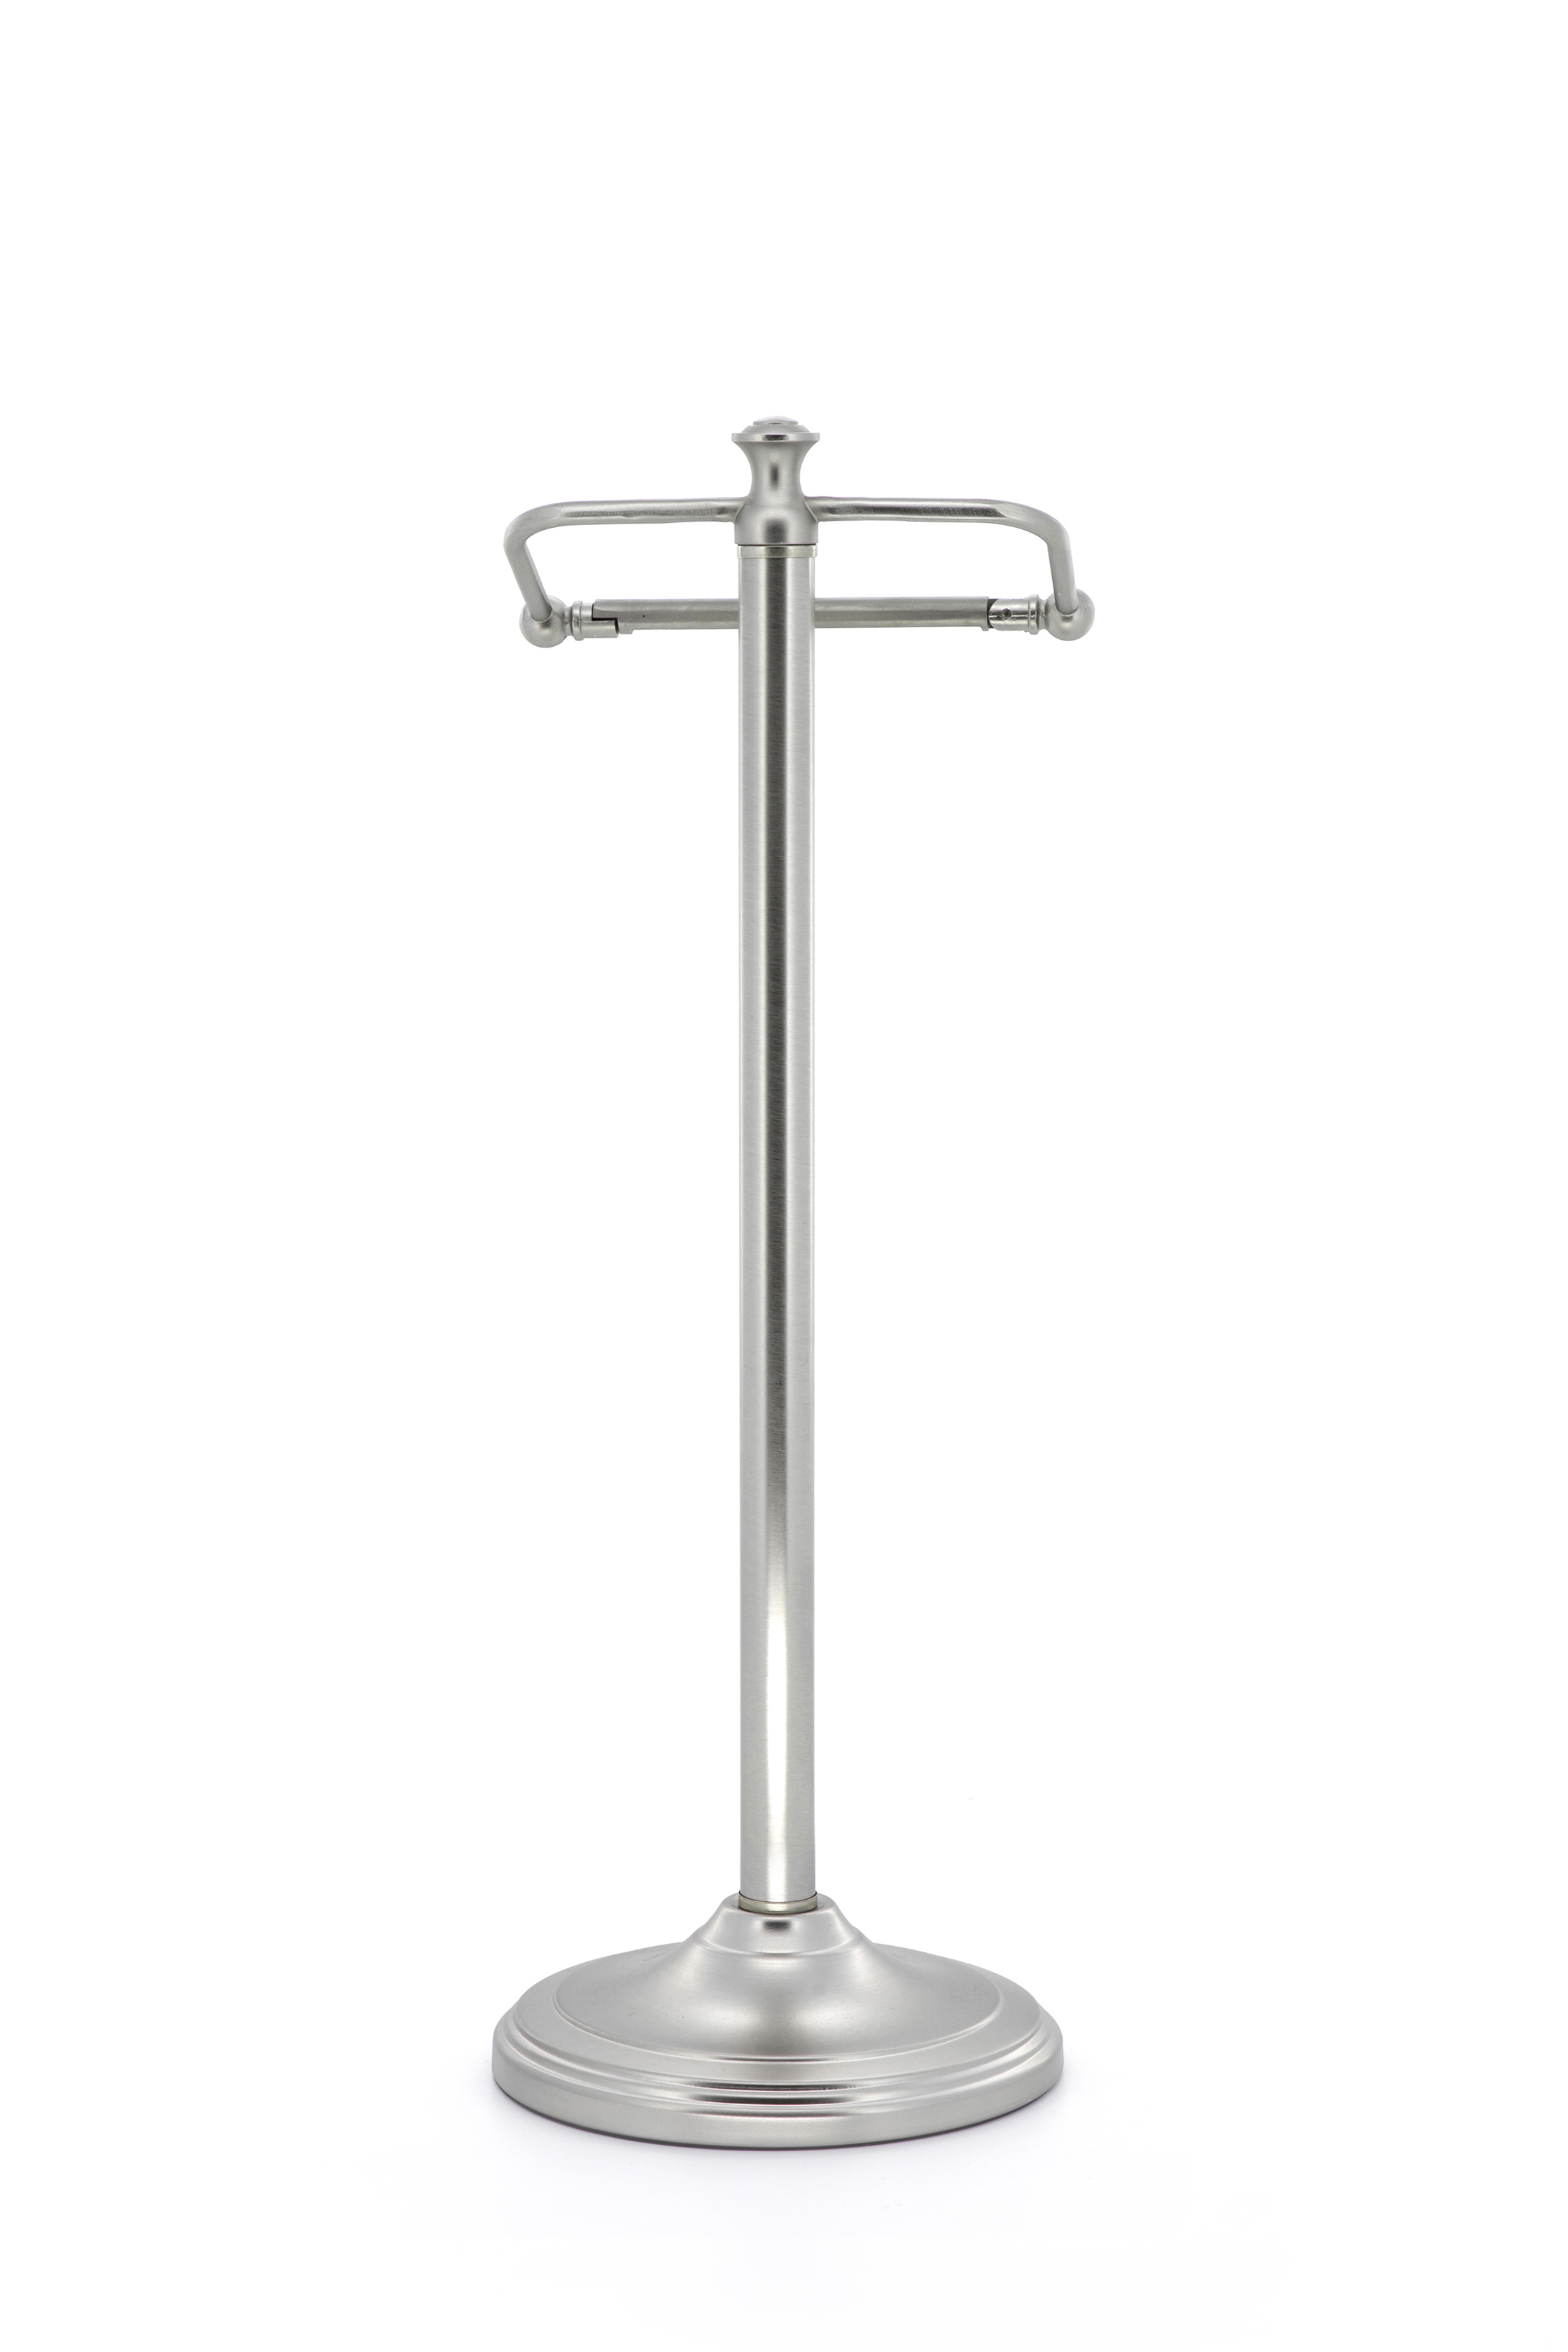 Delta Freestanding Toilet Paper Holder with Shelf and Reserve in Flat  Nickel 46609-FN - The Home Depot